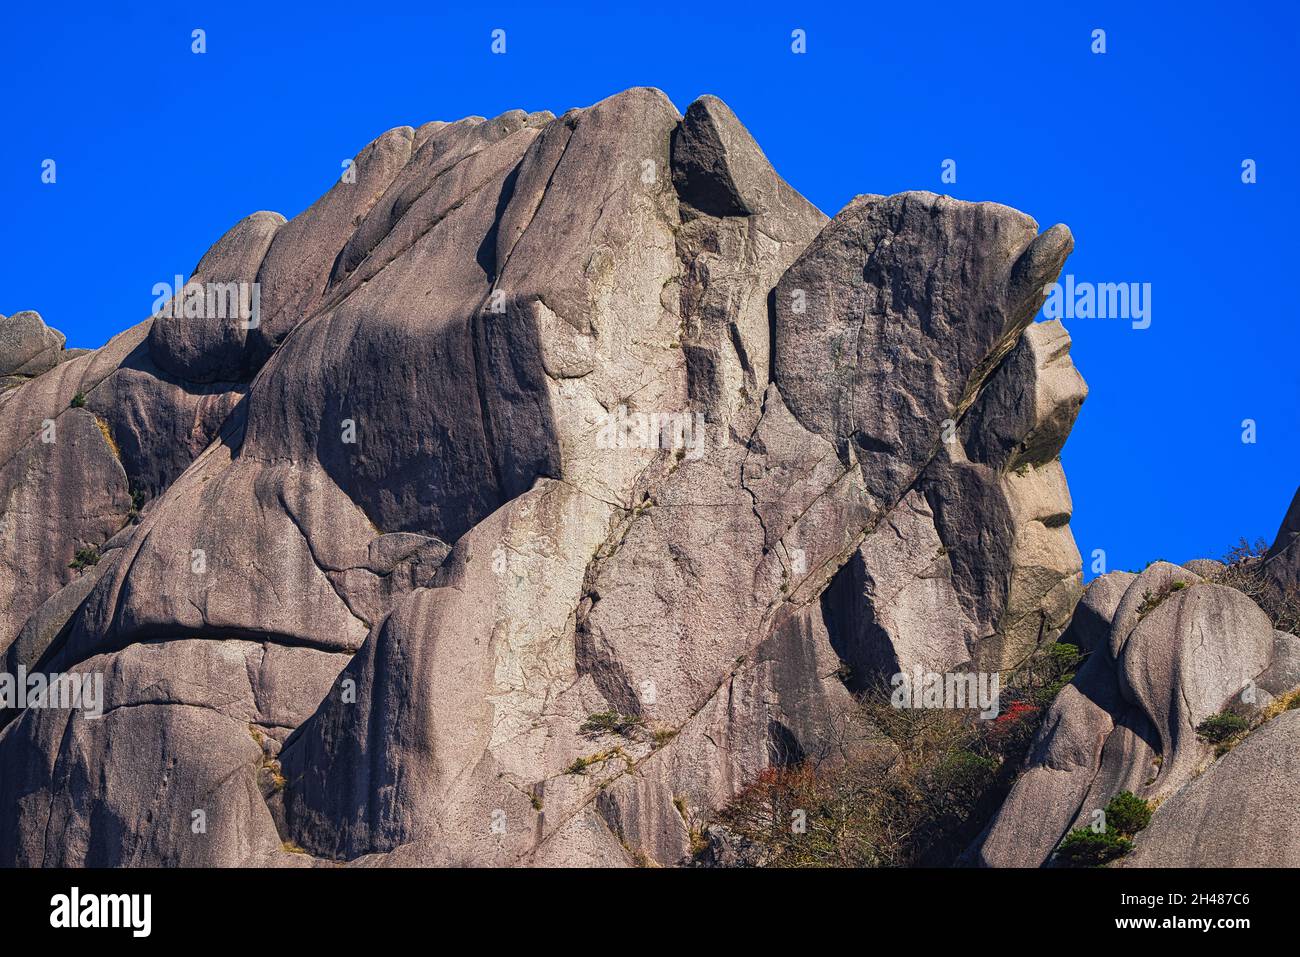 Huge and simply textured granite hill. Landscape of Mount Huangshan (Yellow Mountain). UNESCO World Heritage Site. Anhui Province, China. Stock Photo